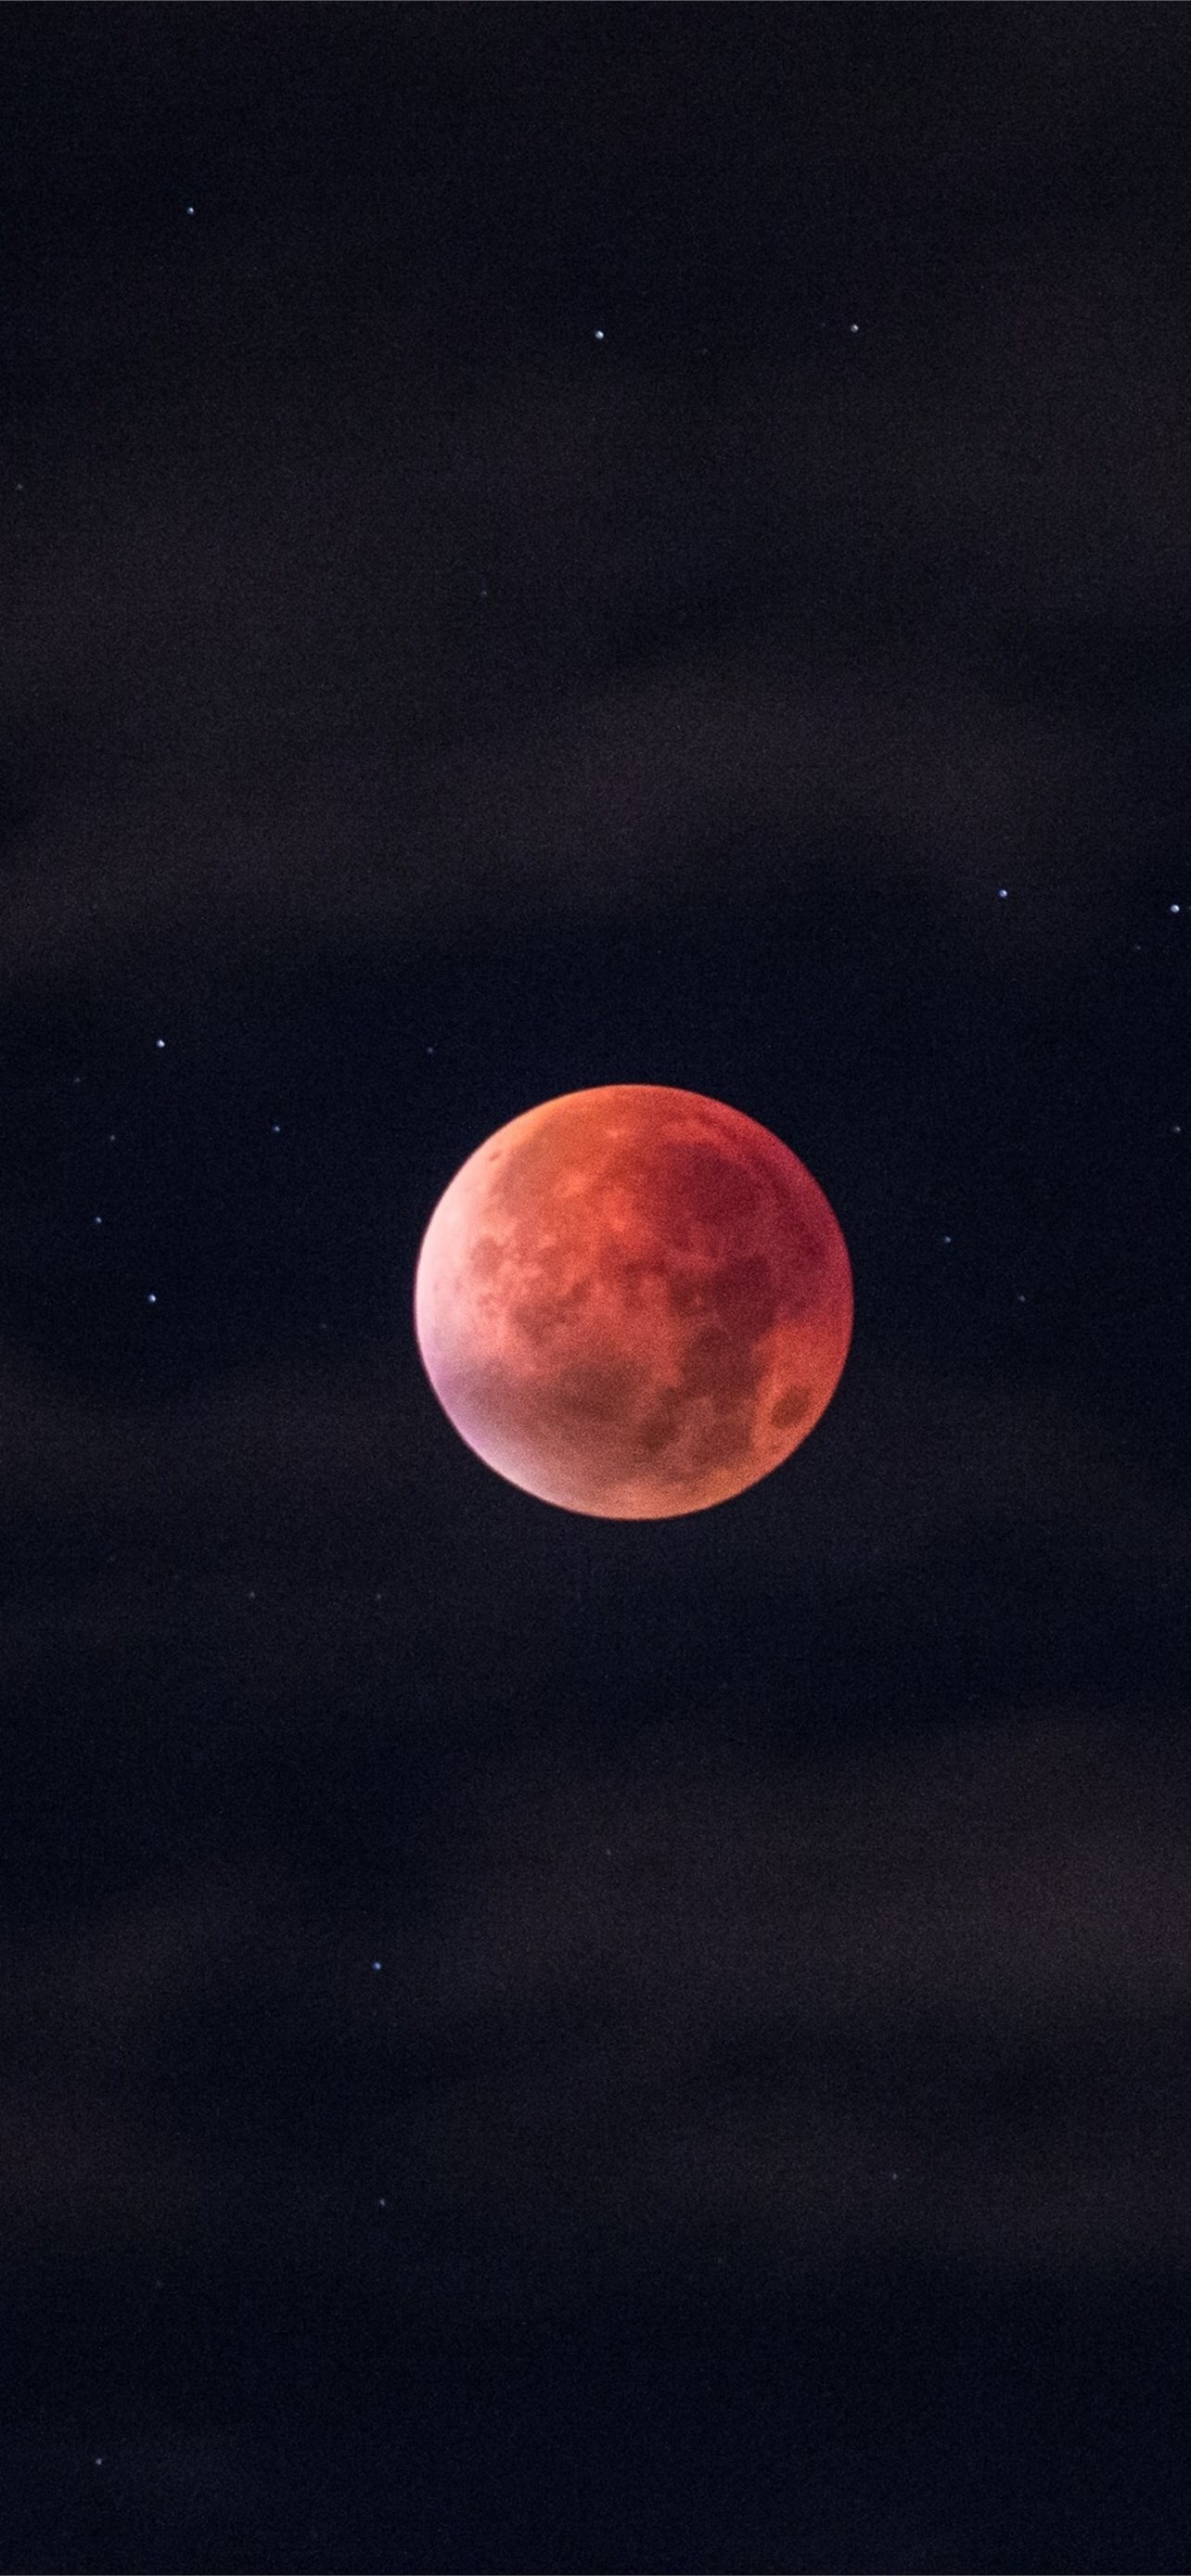 A red moon with a black sky - Moon